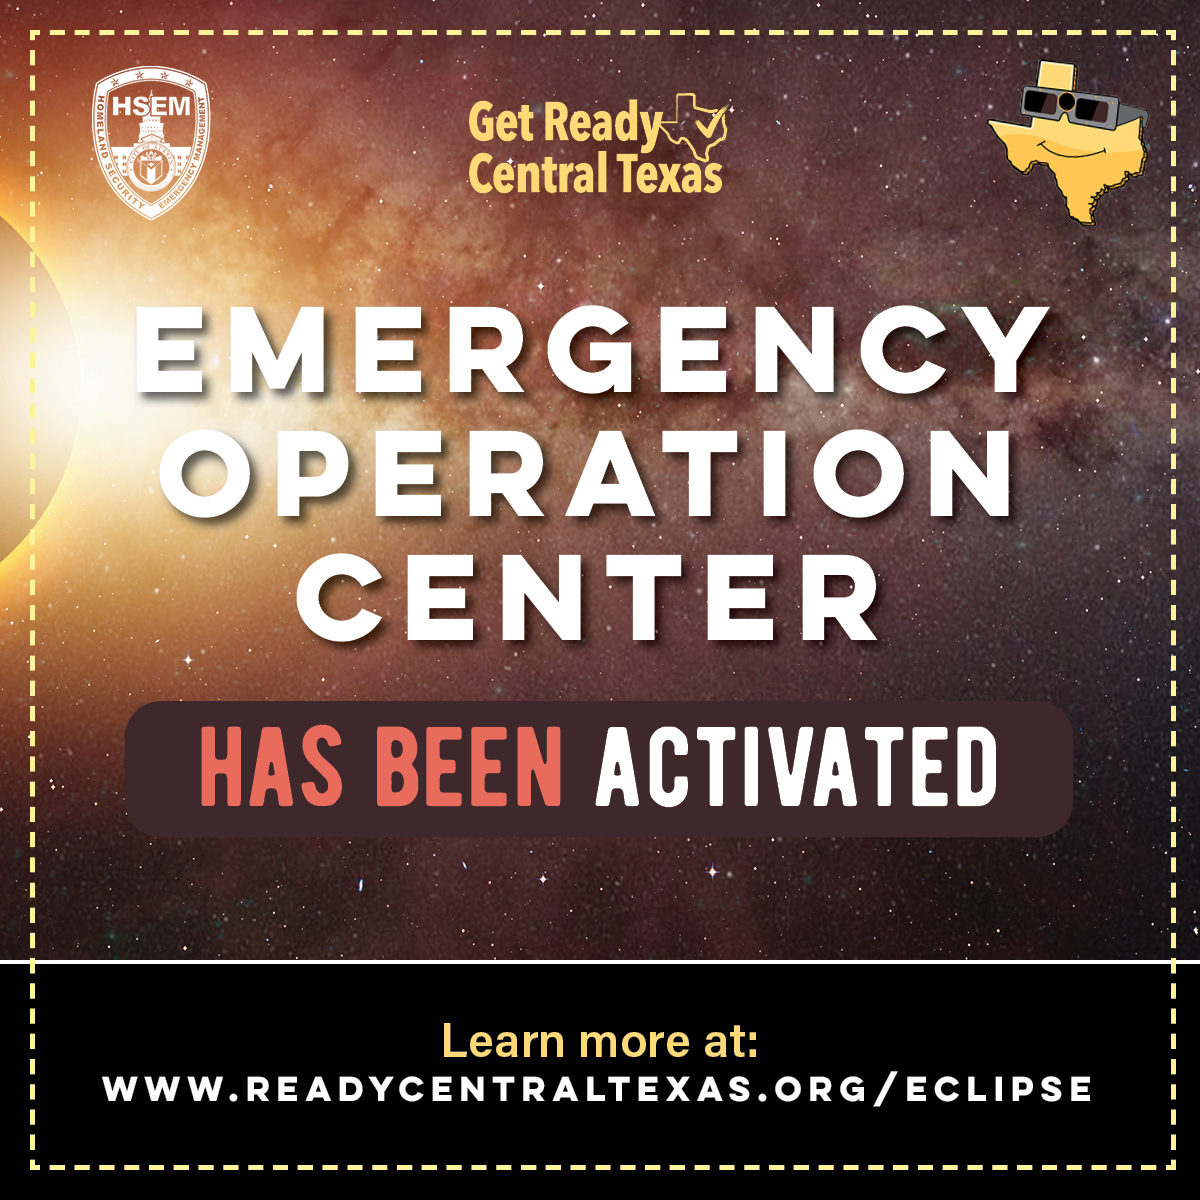 The Austin-Travis County Emergency Operation Center is activated to coordinate response related to Monday's total solar eclipse. The EOC is activated until 7 pm Sunday & Monday from 7 am - 7 pm. Critical updates will be posted online at austintexas.gov/alerts in 14 languages.